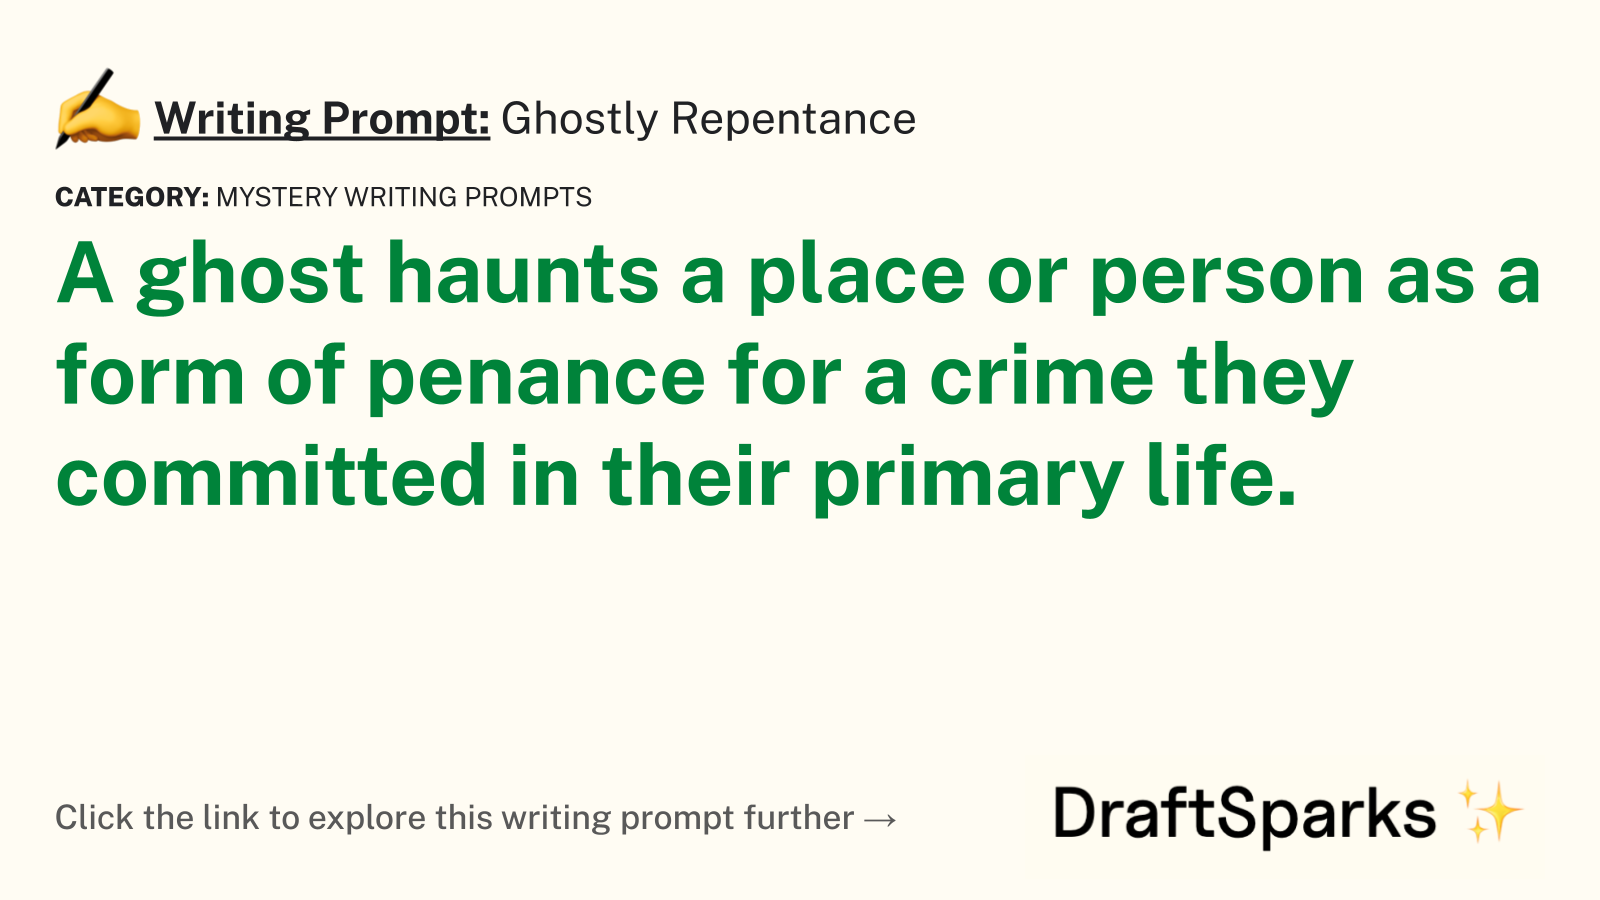 Ghostly Repentance